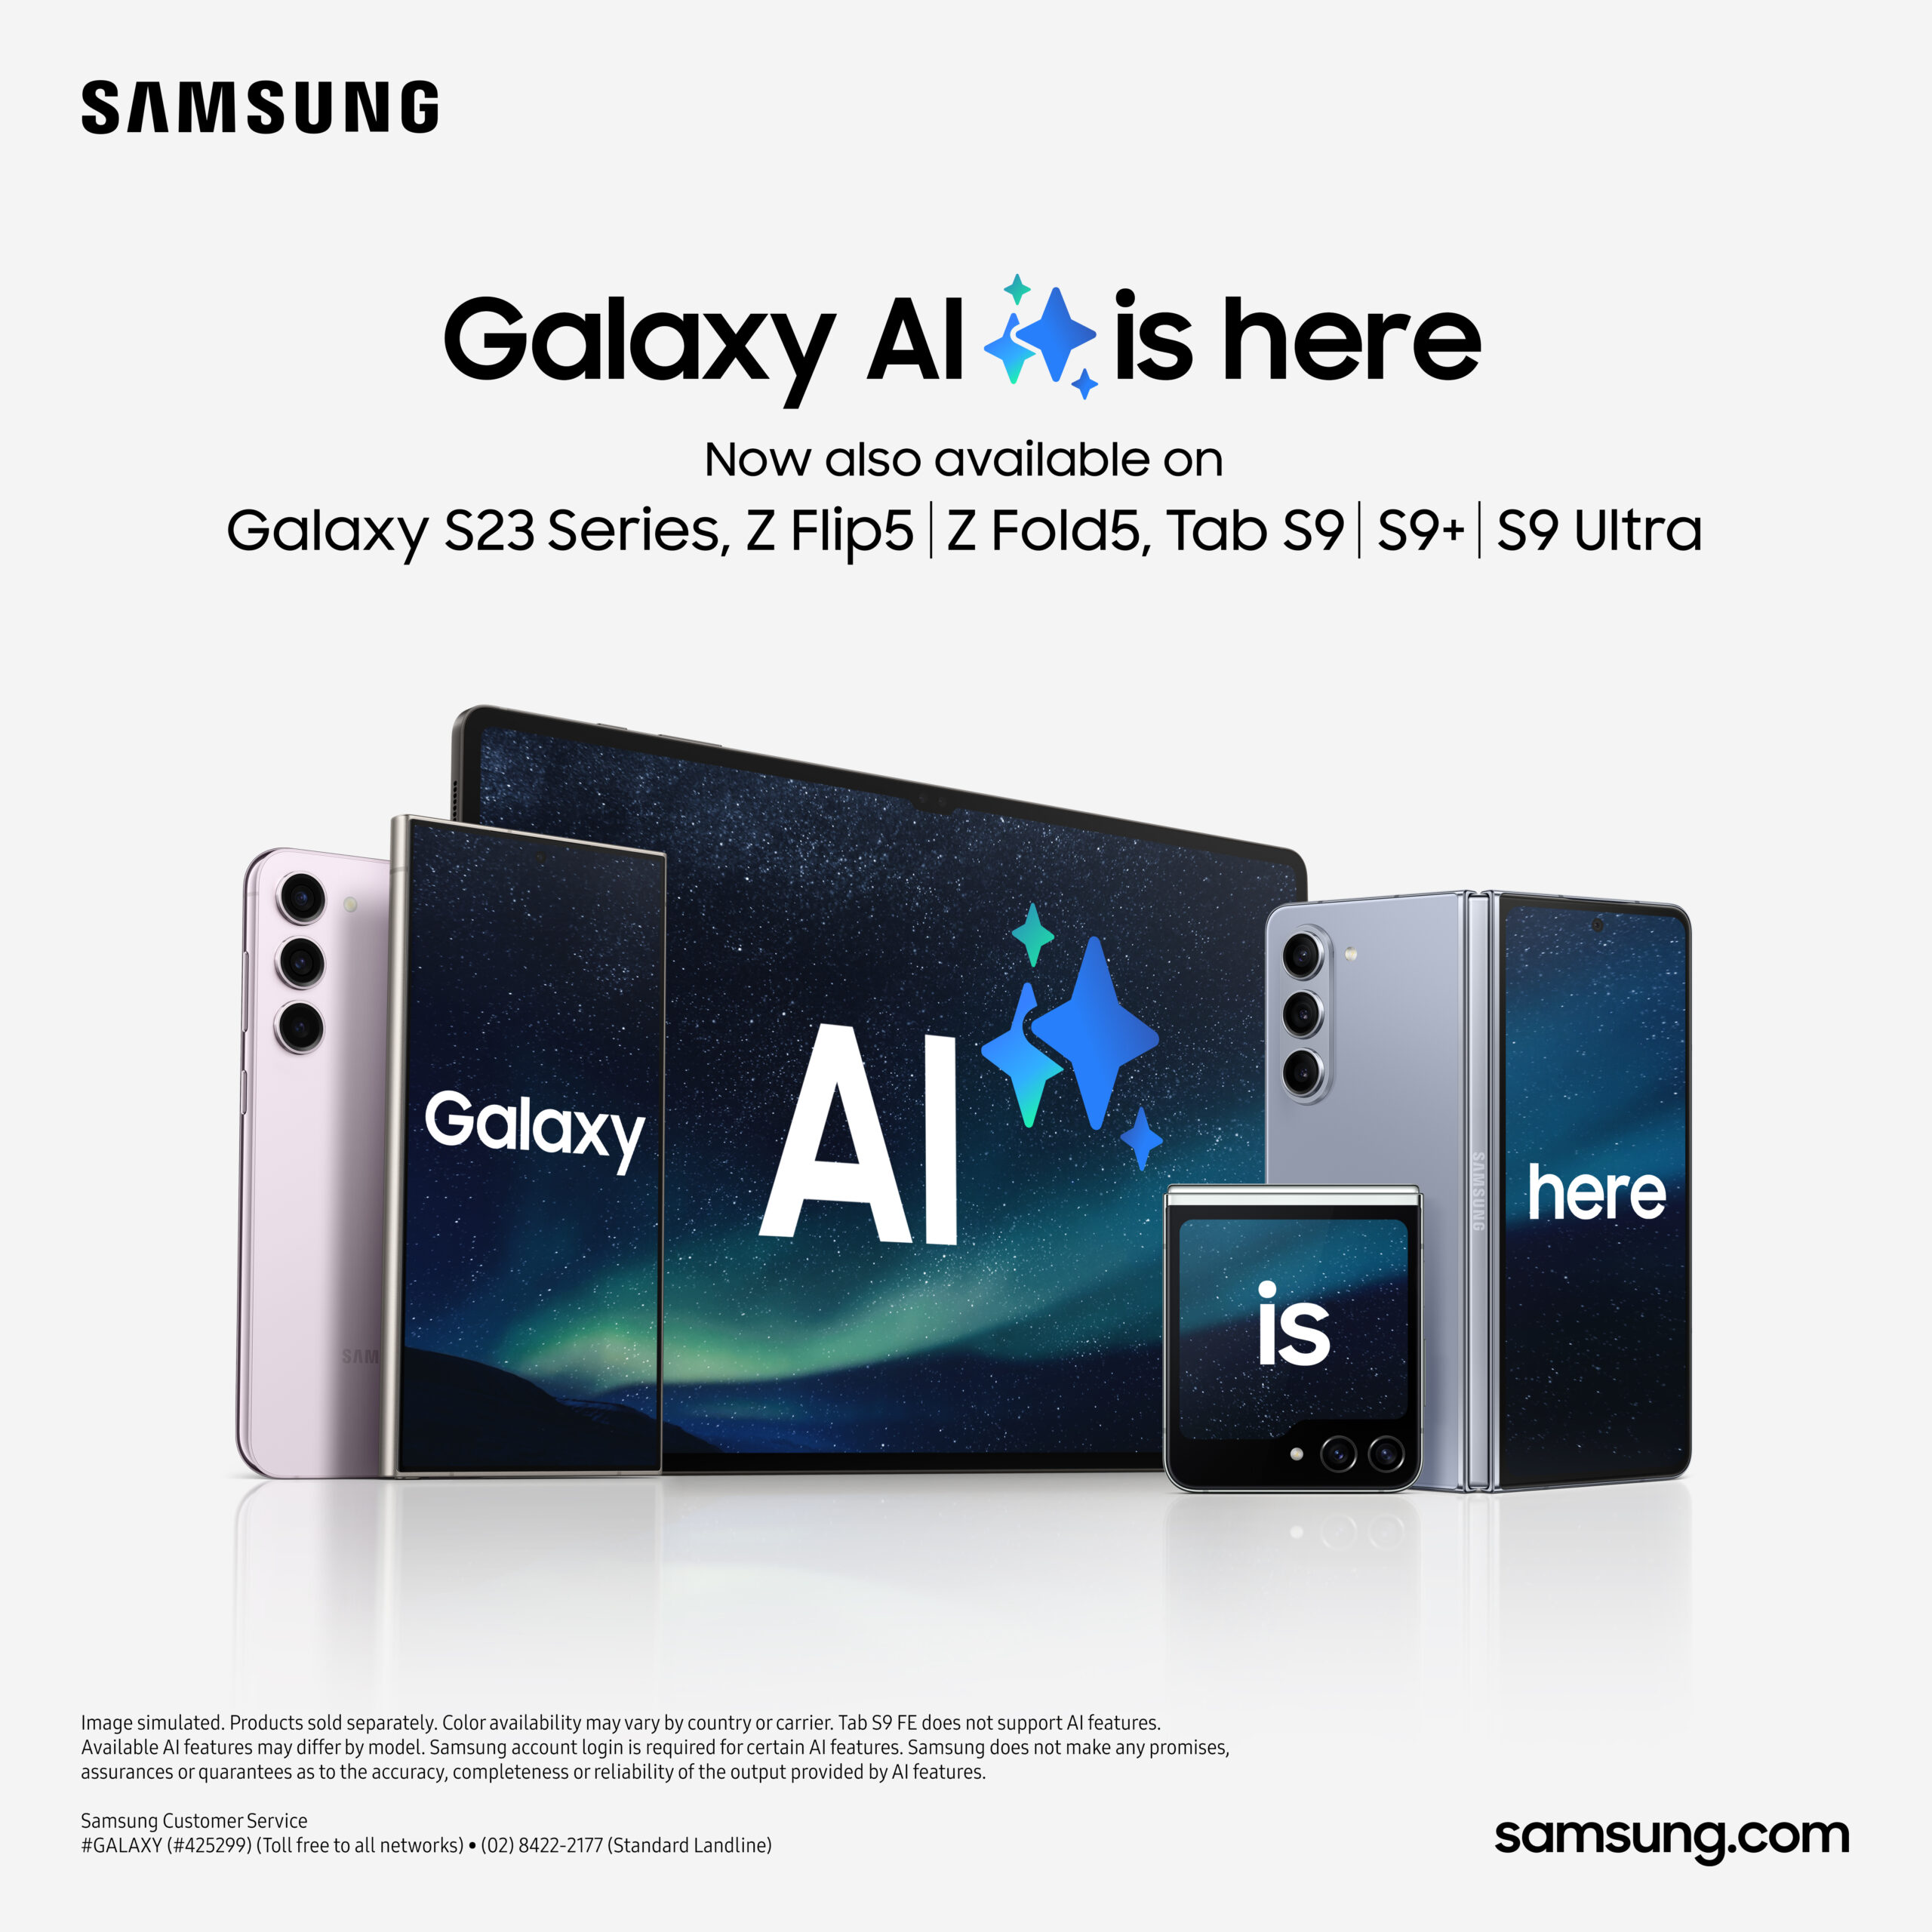 Own a Galaxy S23, Z Flip5, Z Fold5, or Tab S9? Galaxy AI is now in your hands with the new One UI 6.1 Update